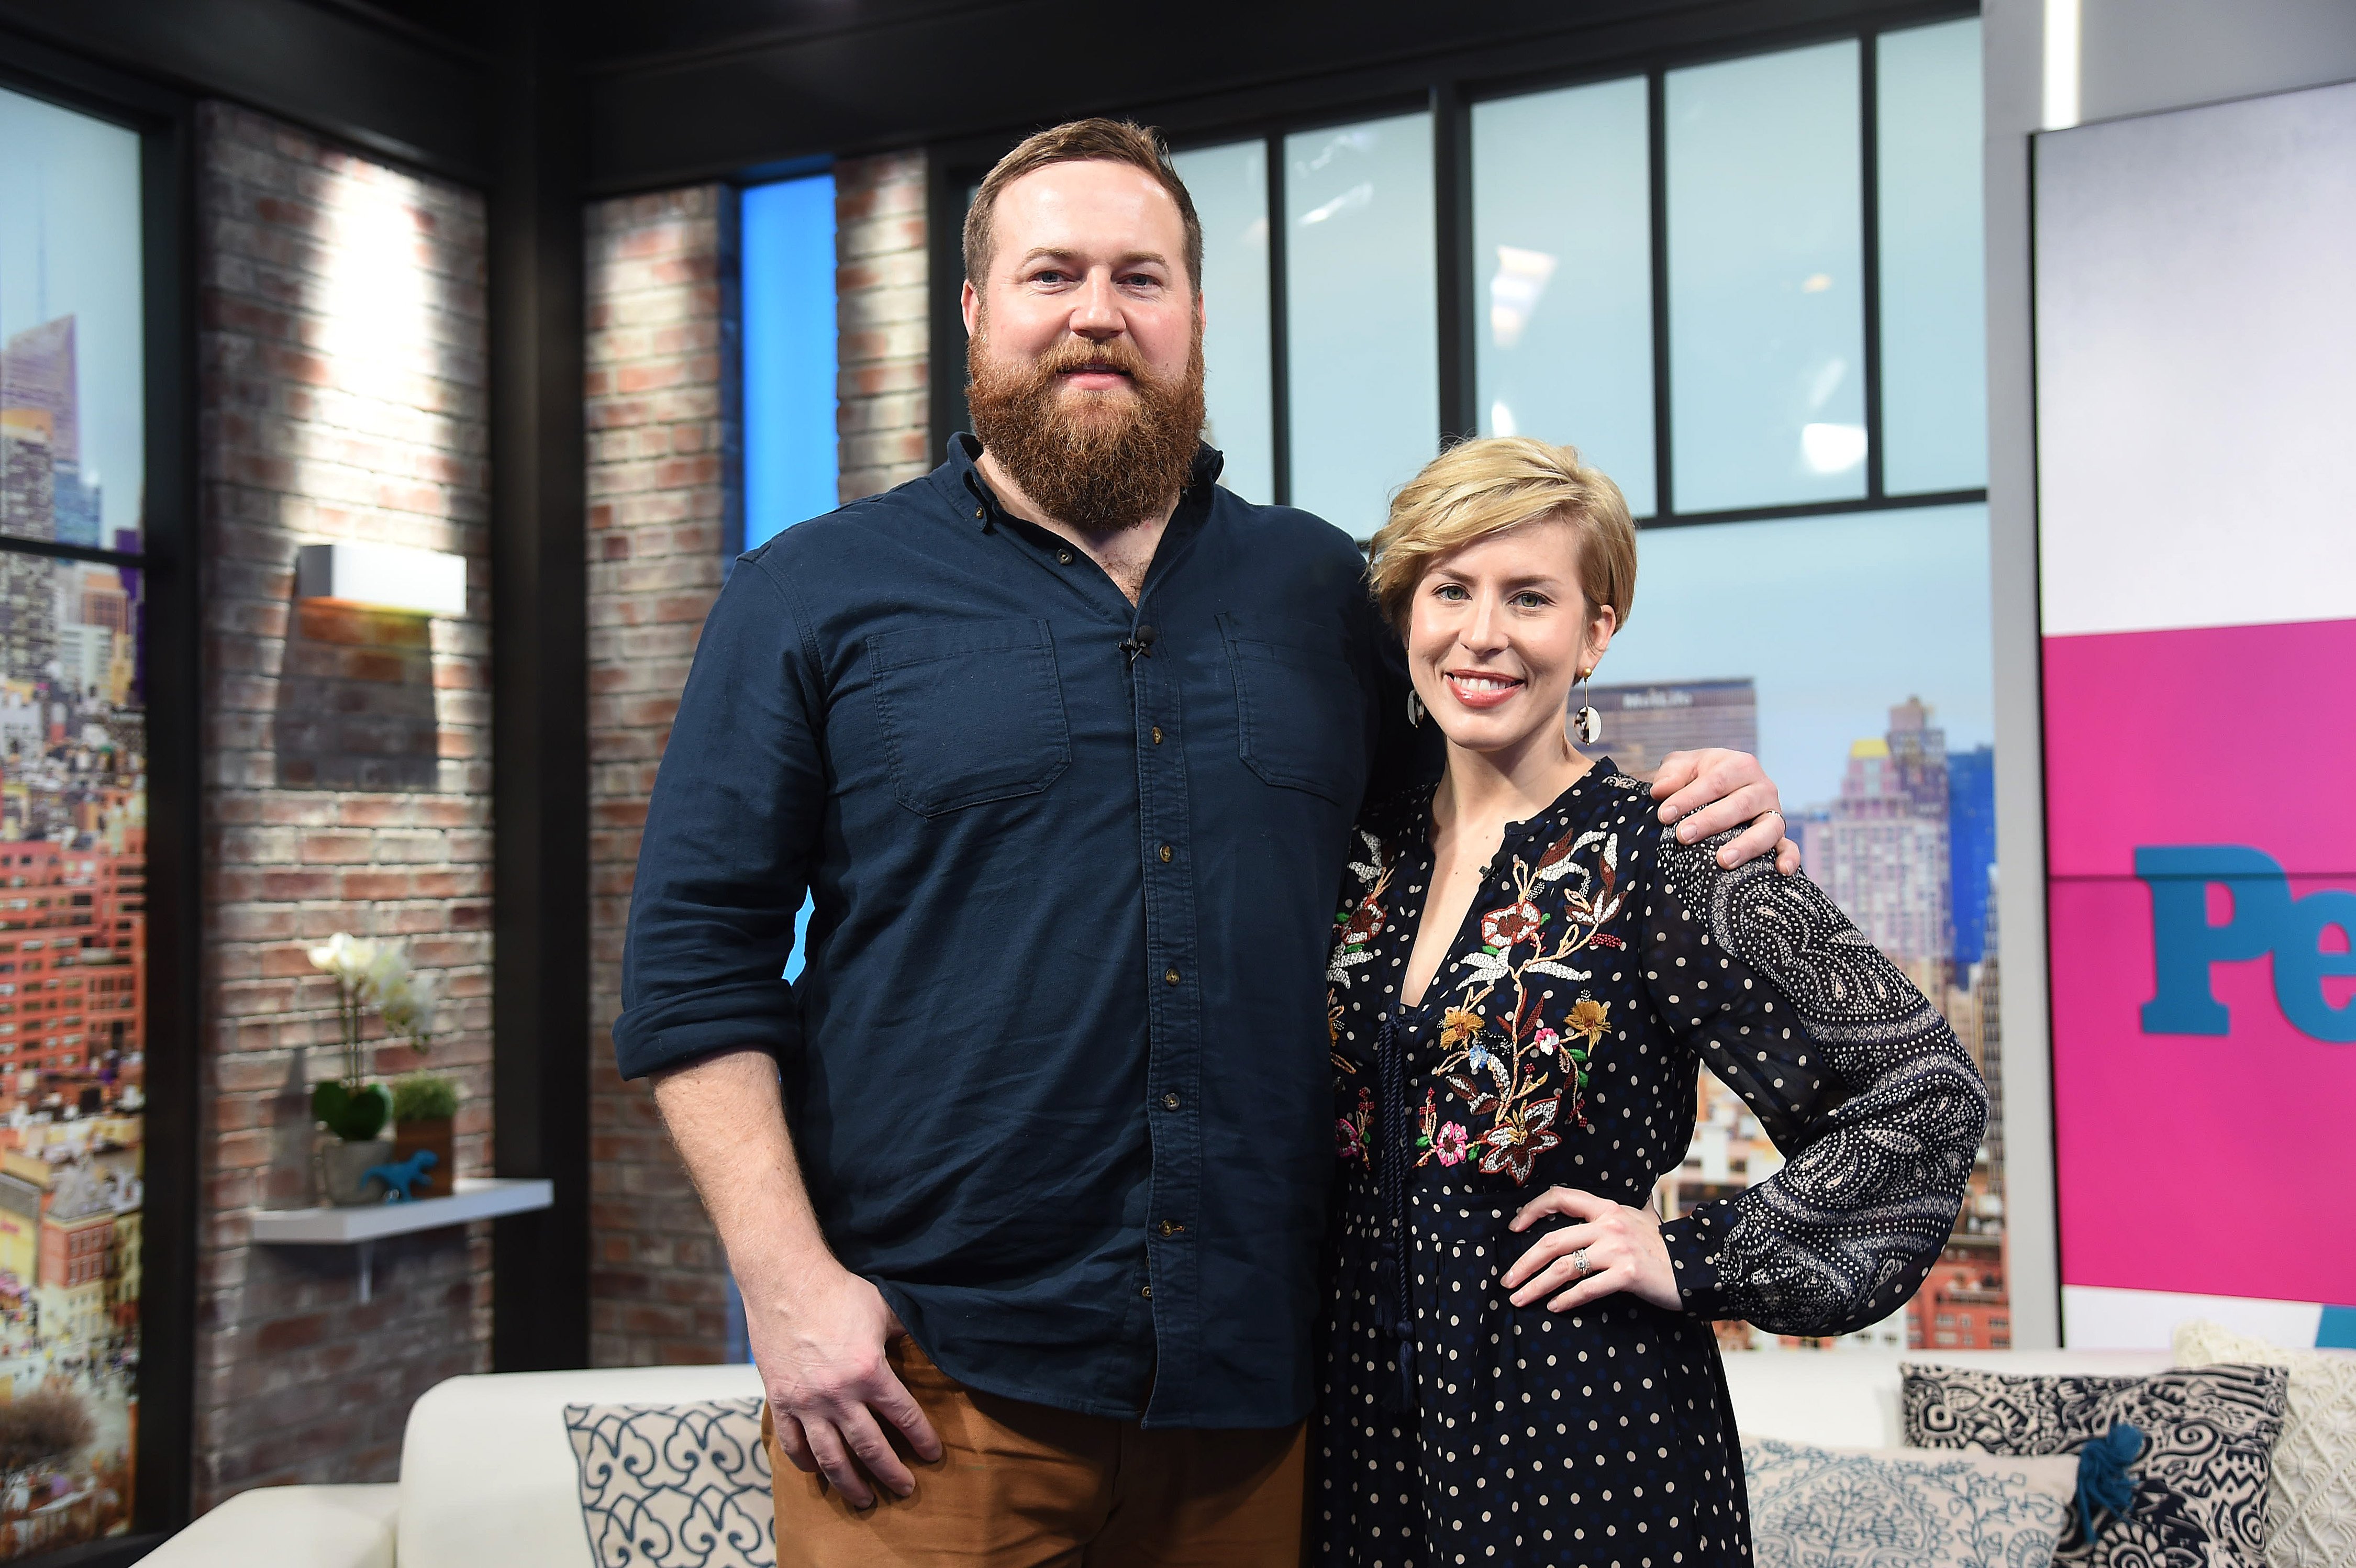 HGTV stars Ben Napier and Erin Napier visit People Now, 2020, New York City. | Photo: Getty Images